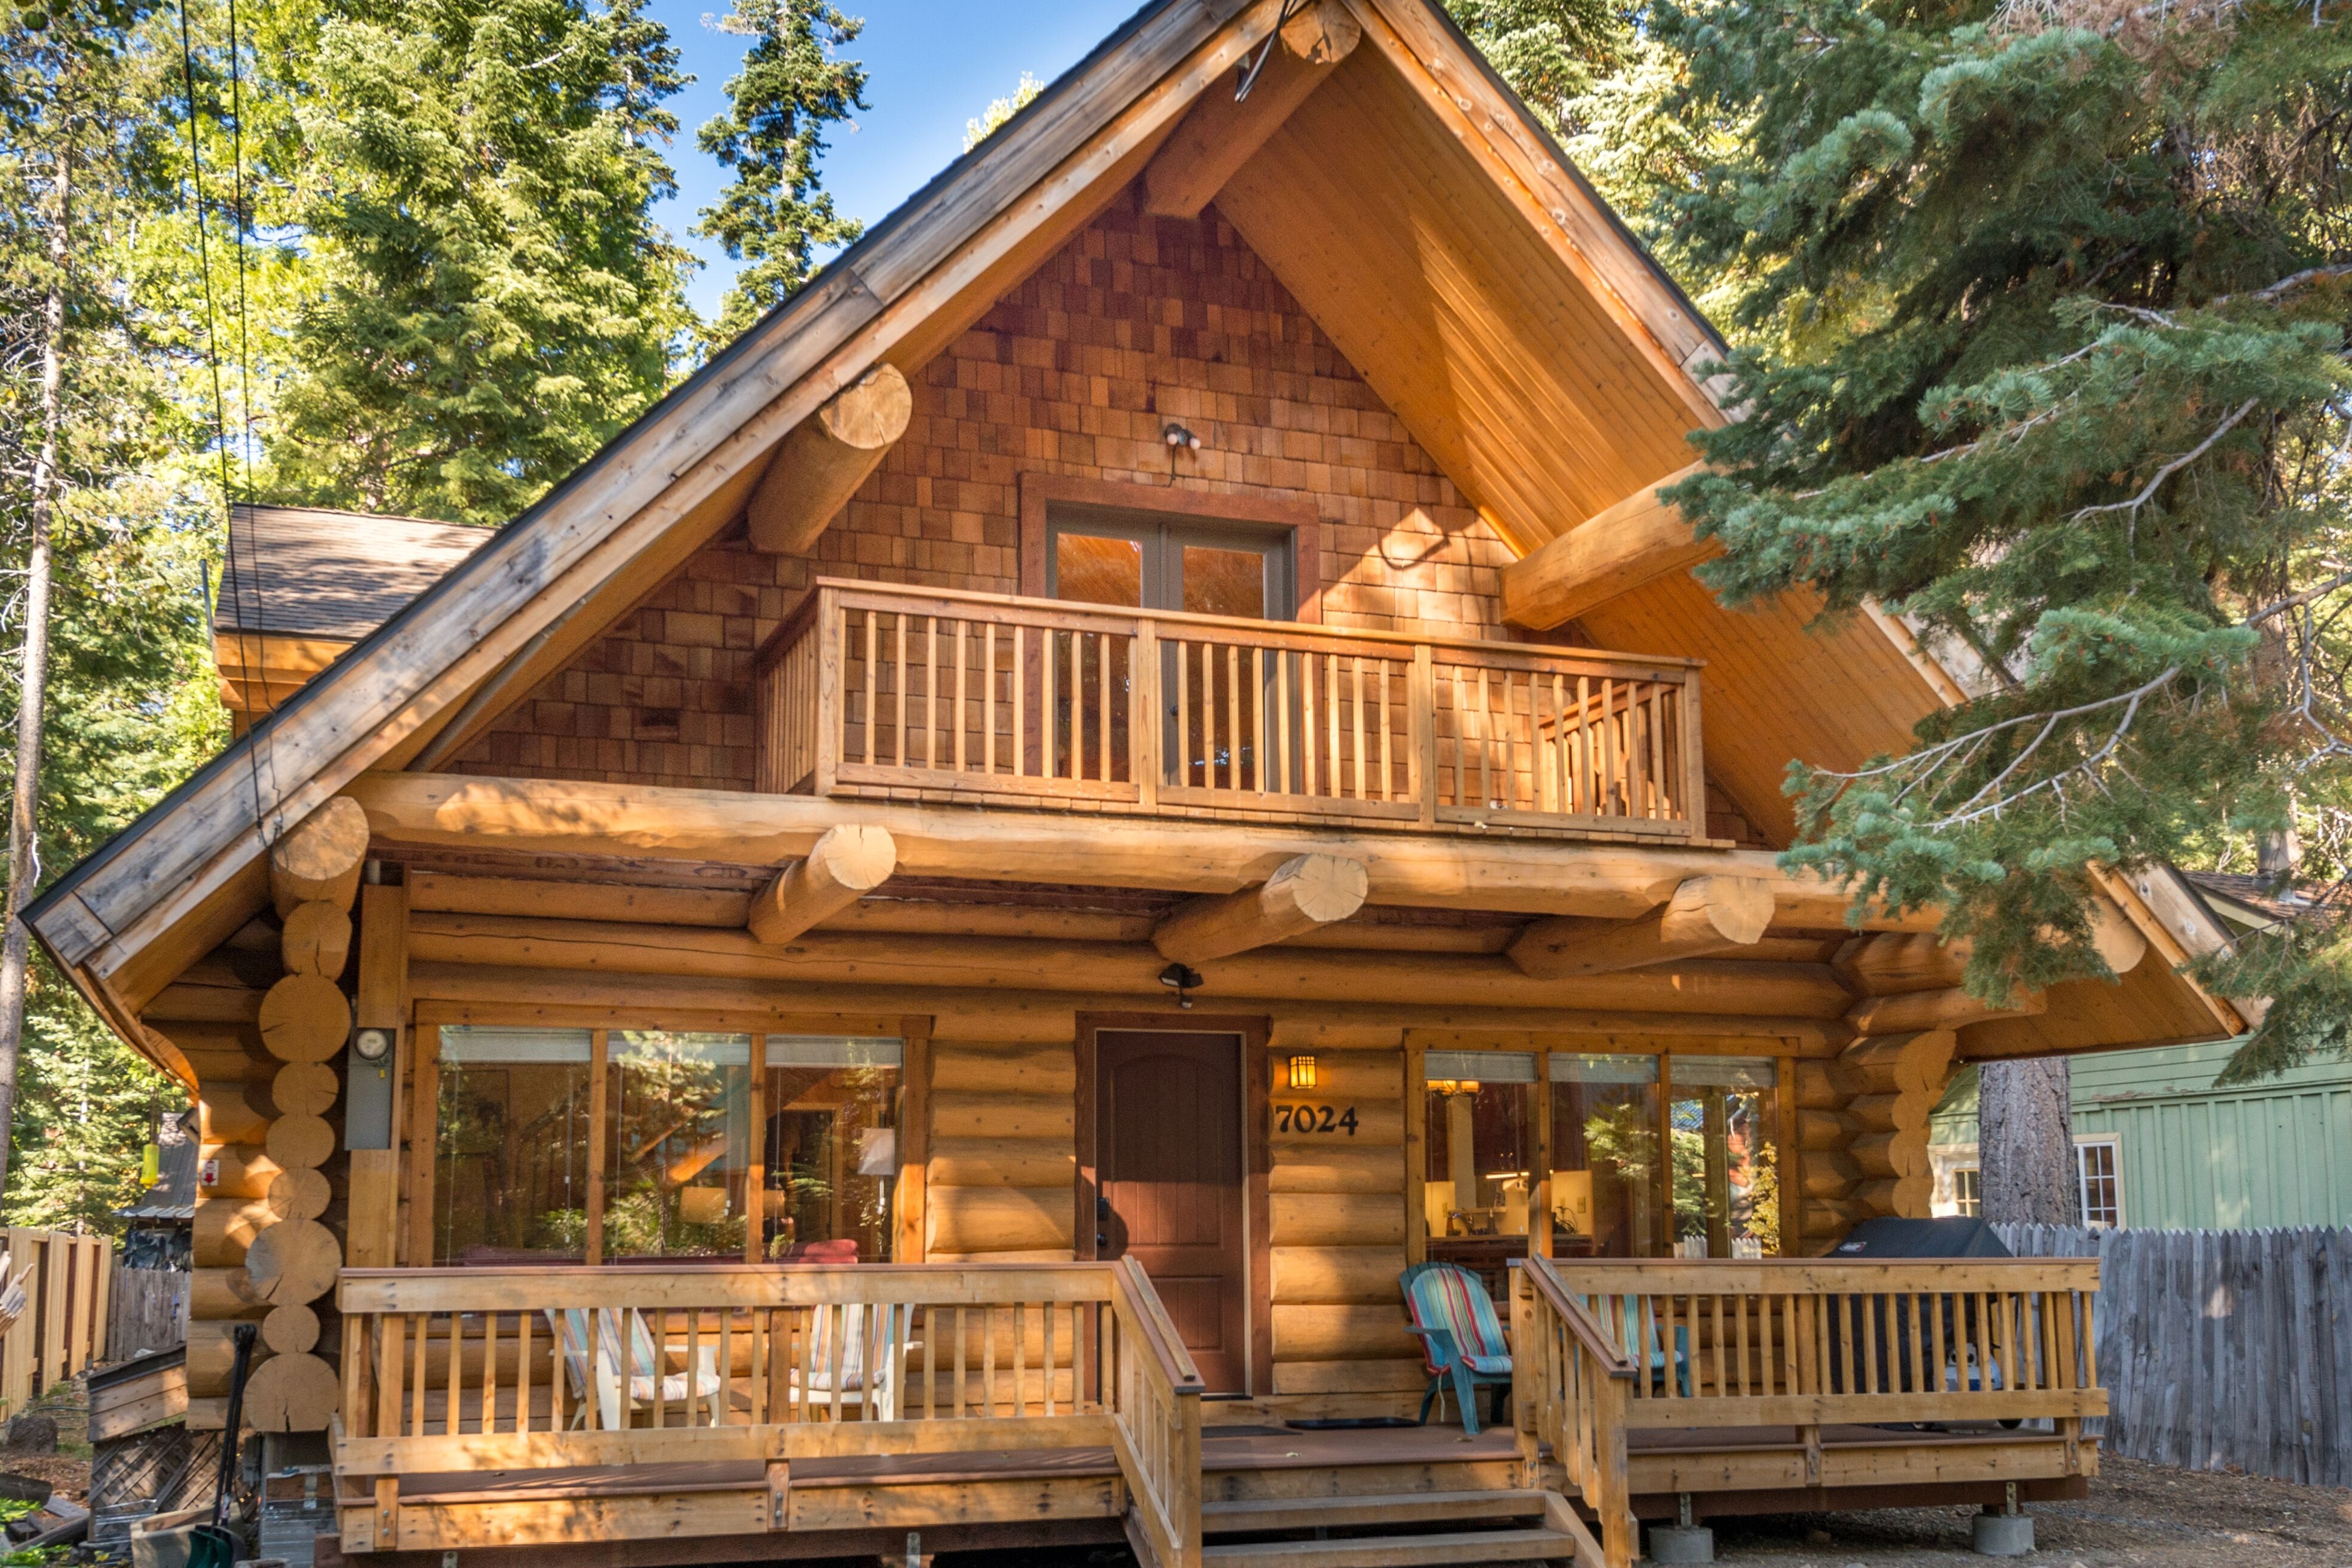 Tahoma 4br3ba Log Cabin 2 Story Cabins For Rent In Tahoma California United States